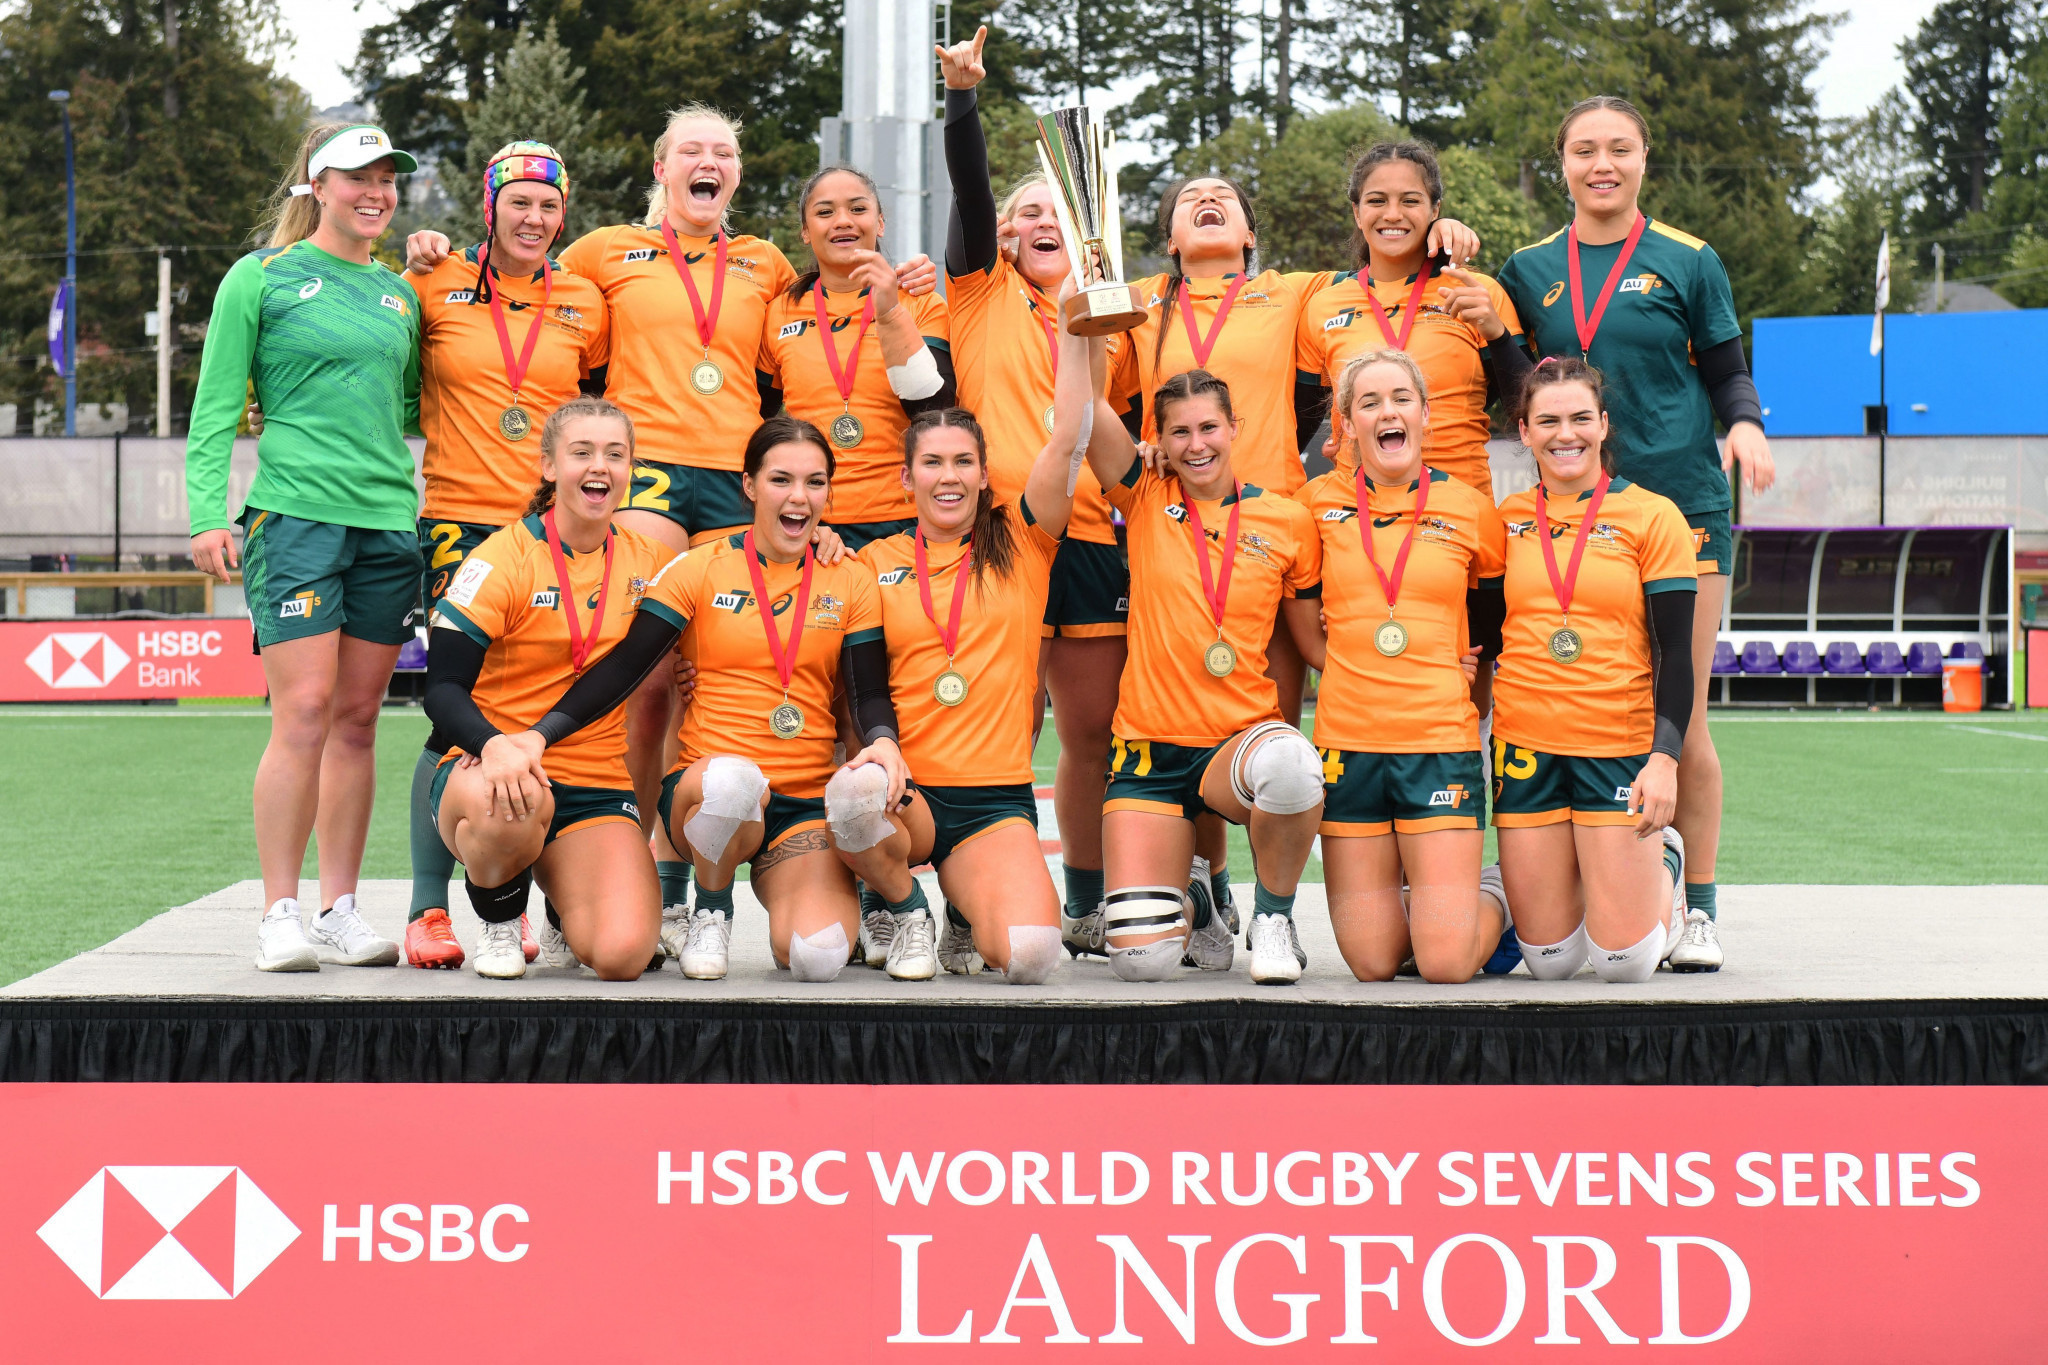 The women's rugby sevens side have been a bright spot for Australian rugby union in recent years ©Getty Images